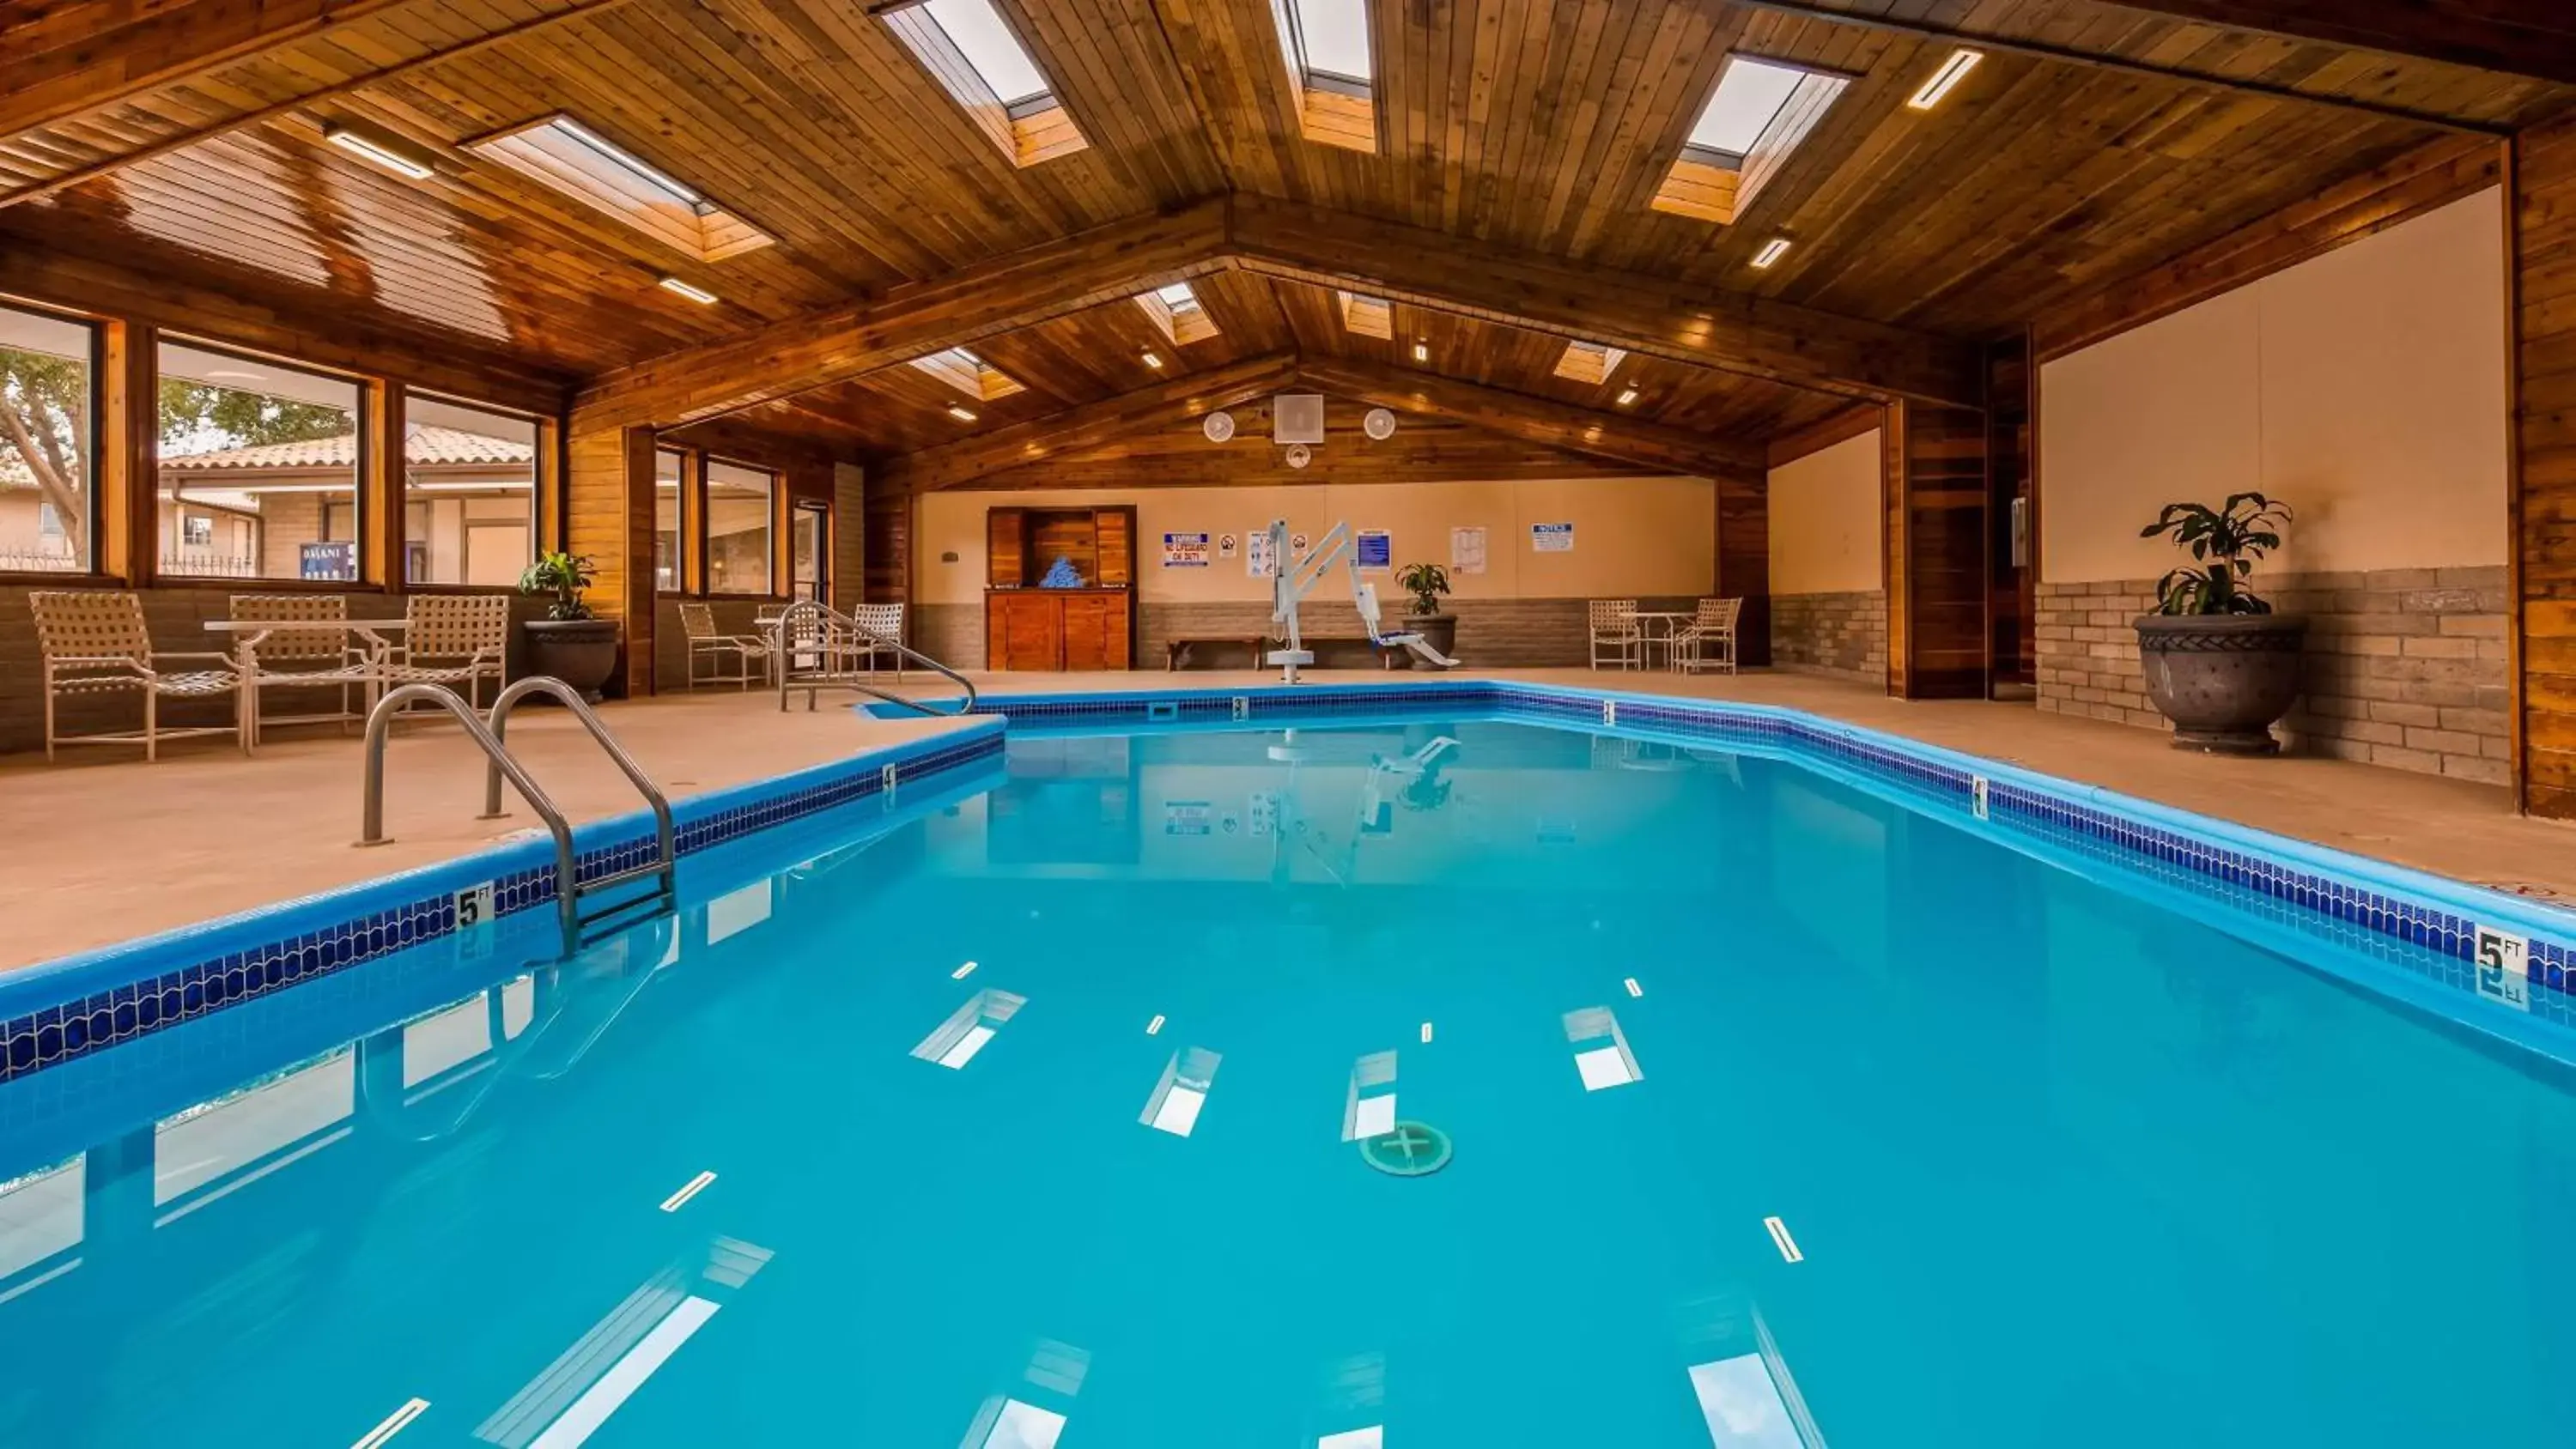 On site, Swimming Pool in Best Western Canyon De Chelly Inn